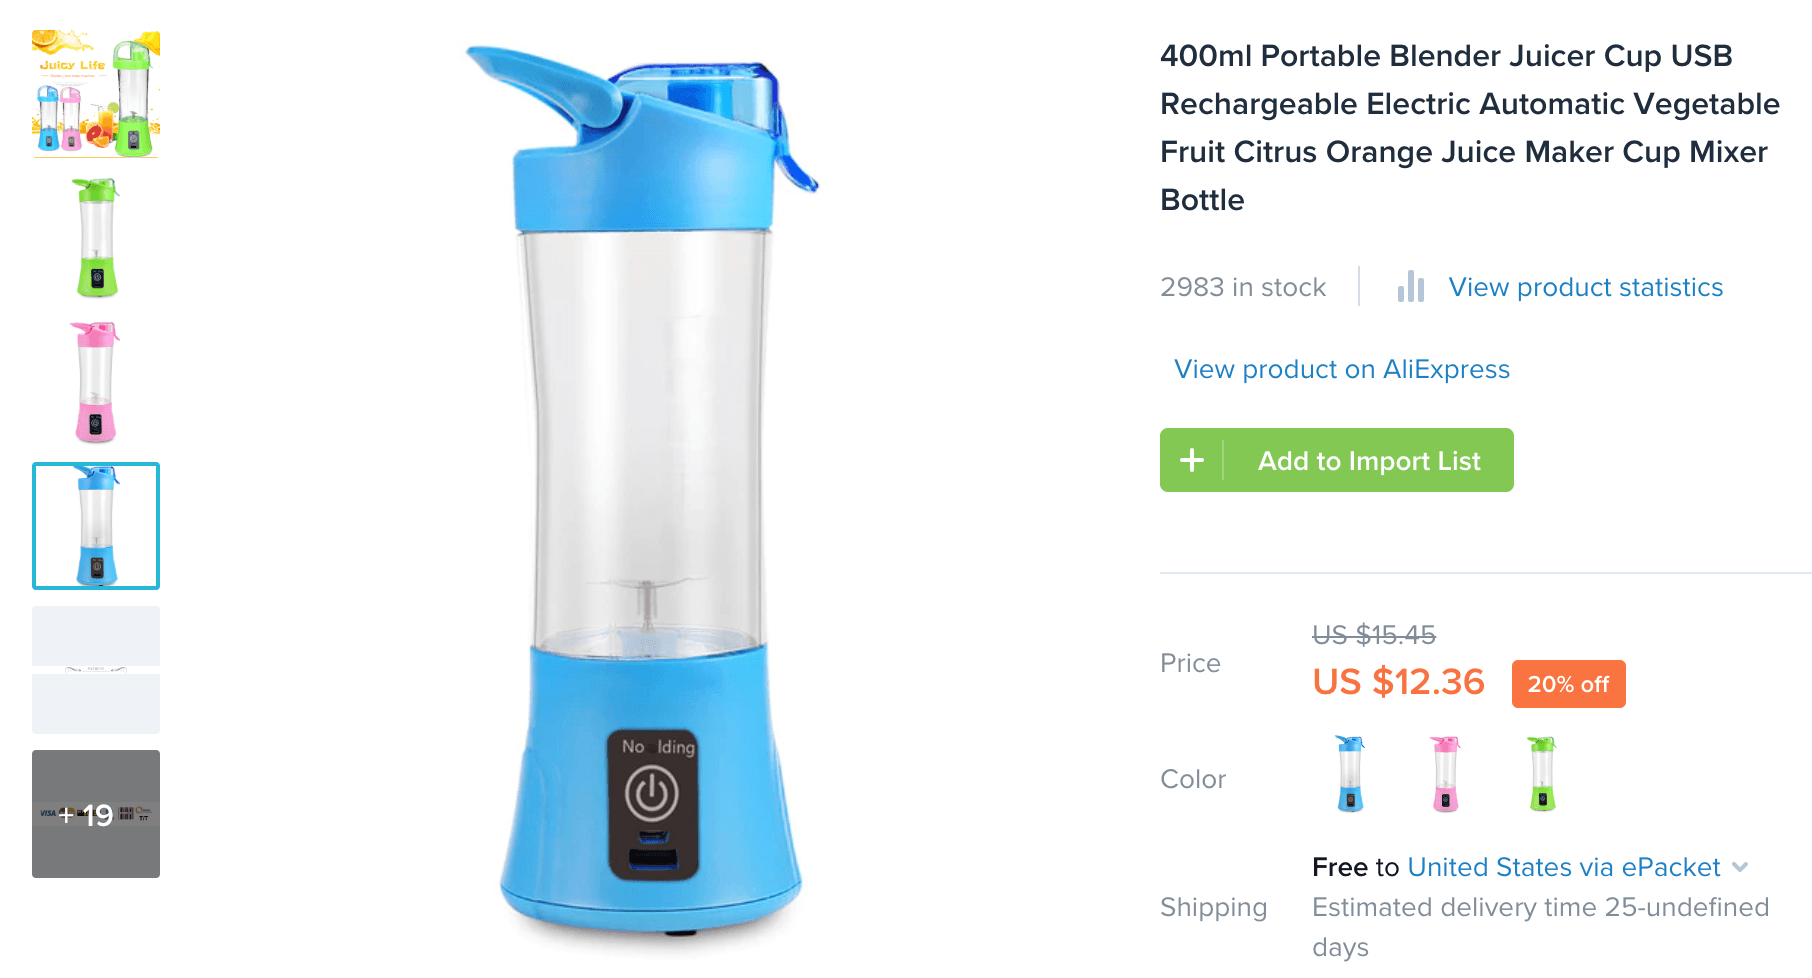 Cool Portable Blender Product